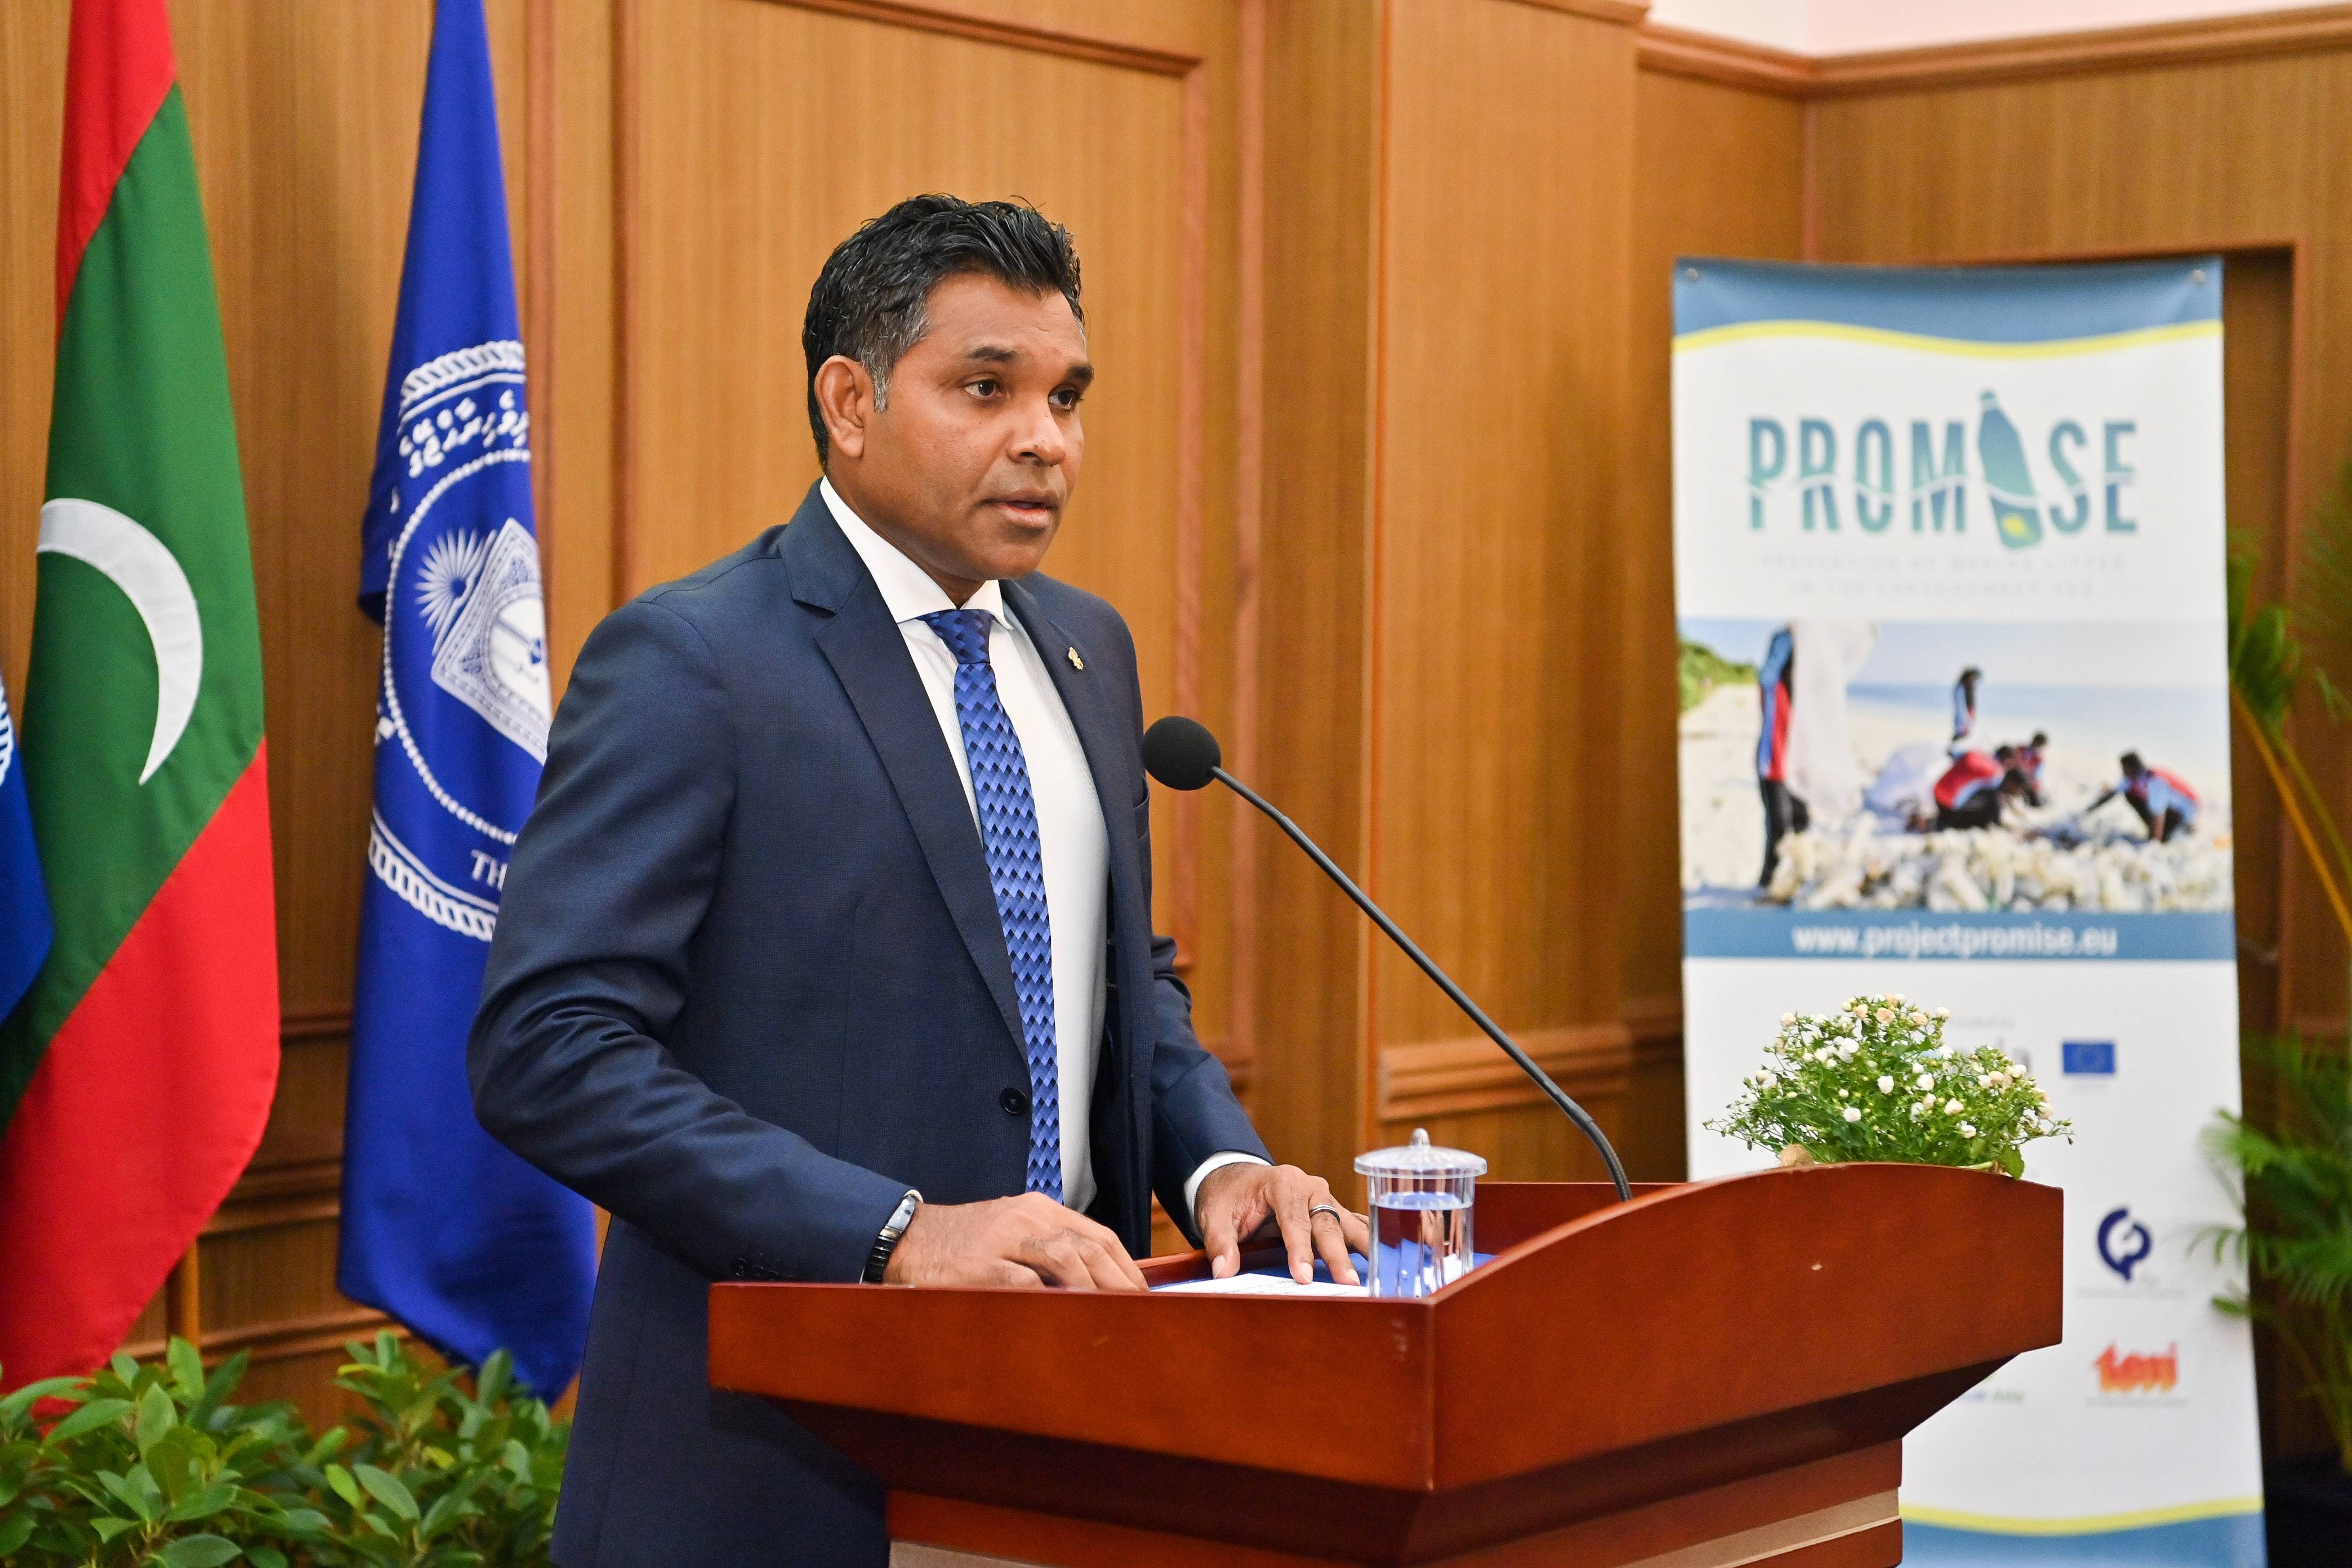 SWITCH-Asia PROMISE and the Government of the Maldives Organise Policy Roundtable on Marine Litter Prevention